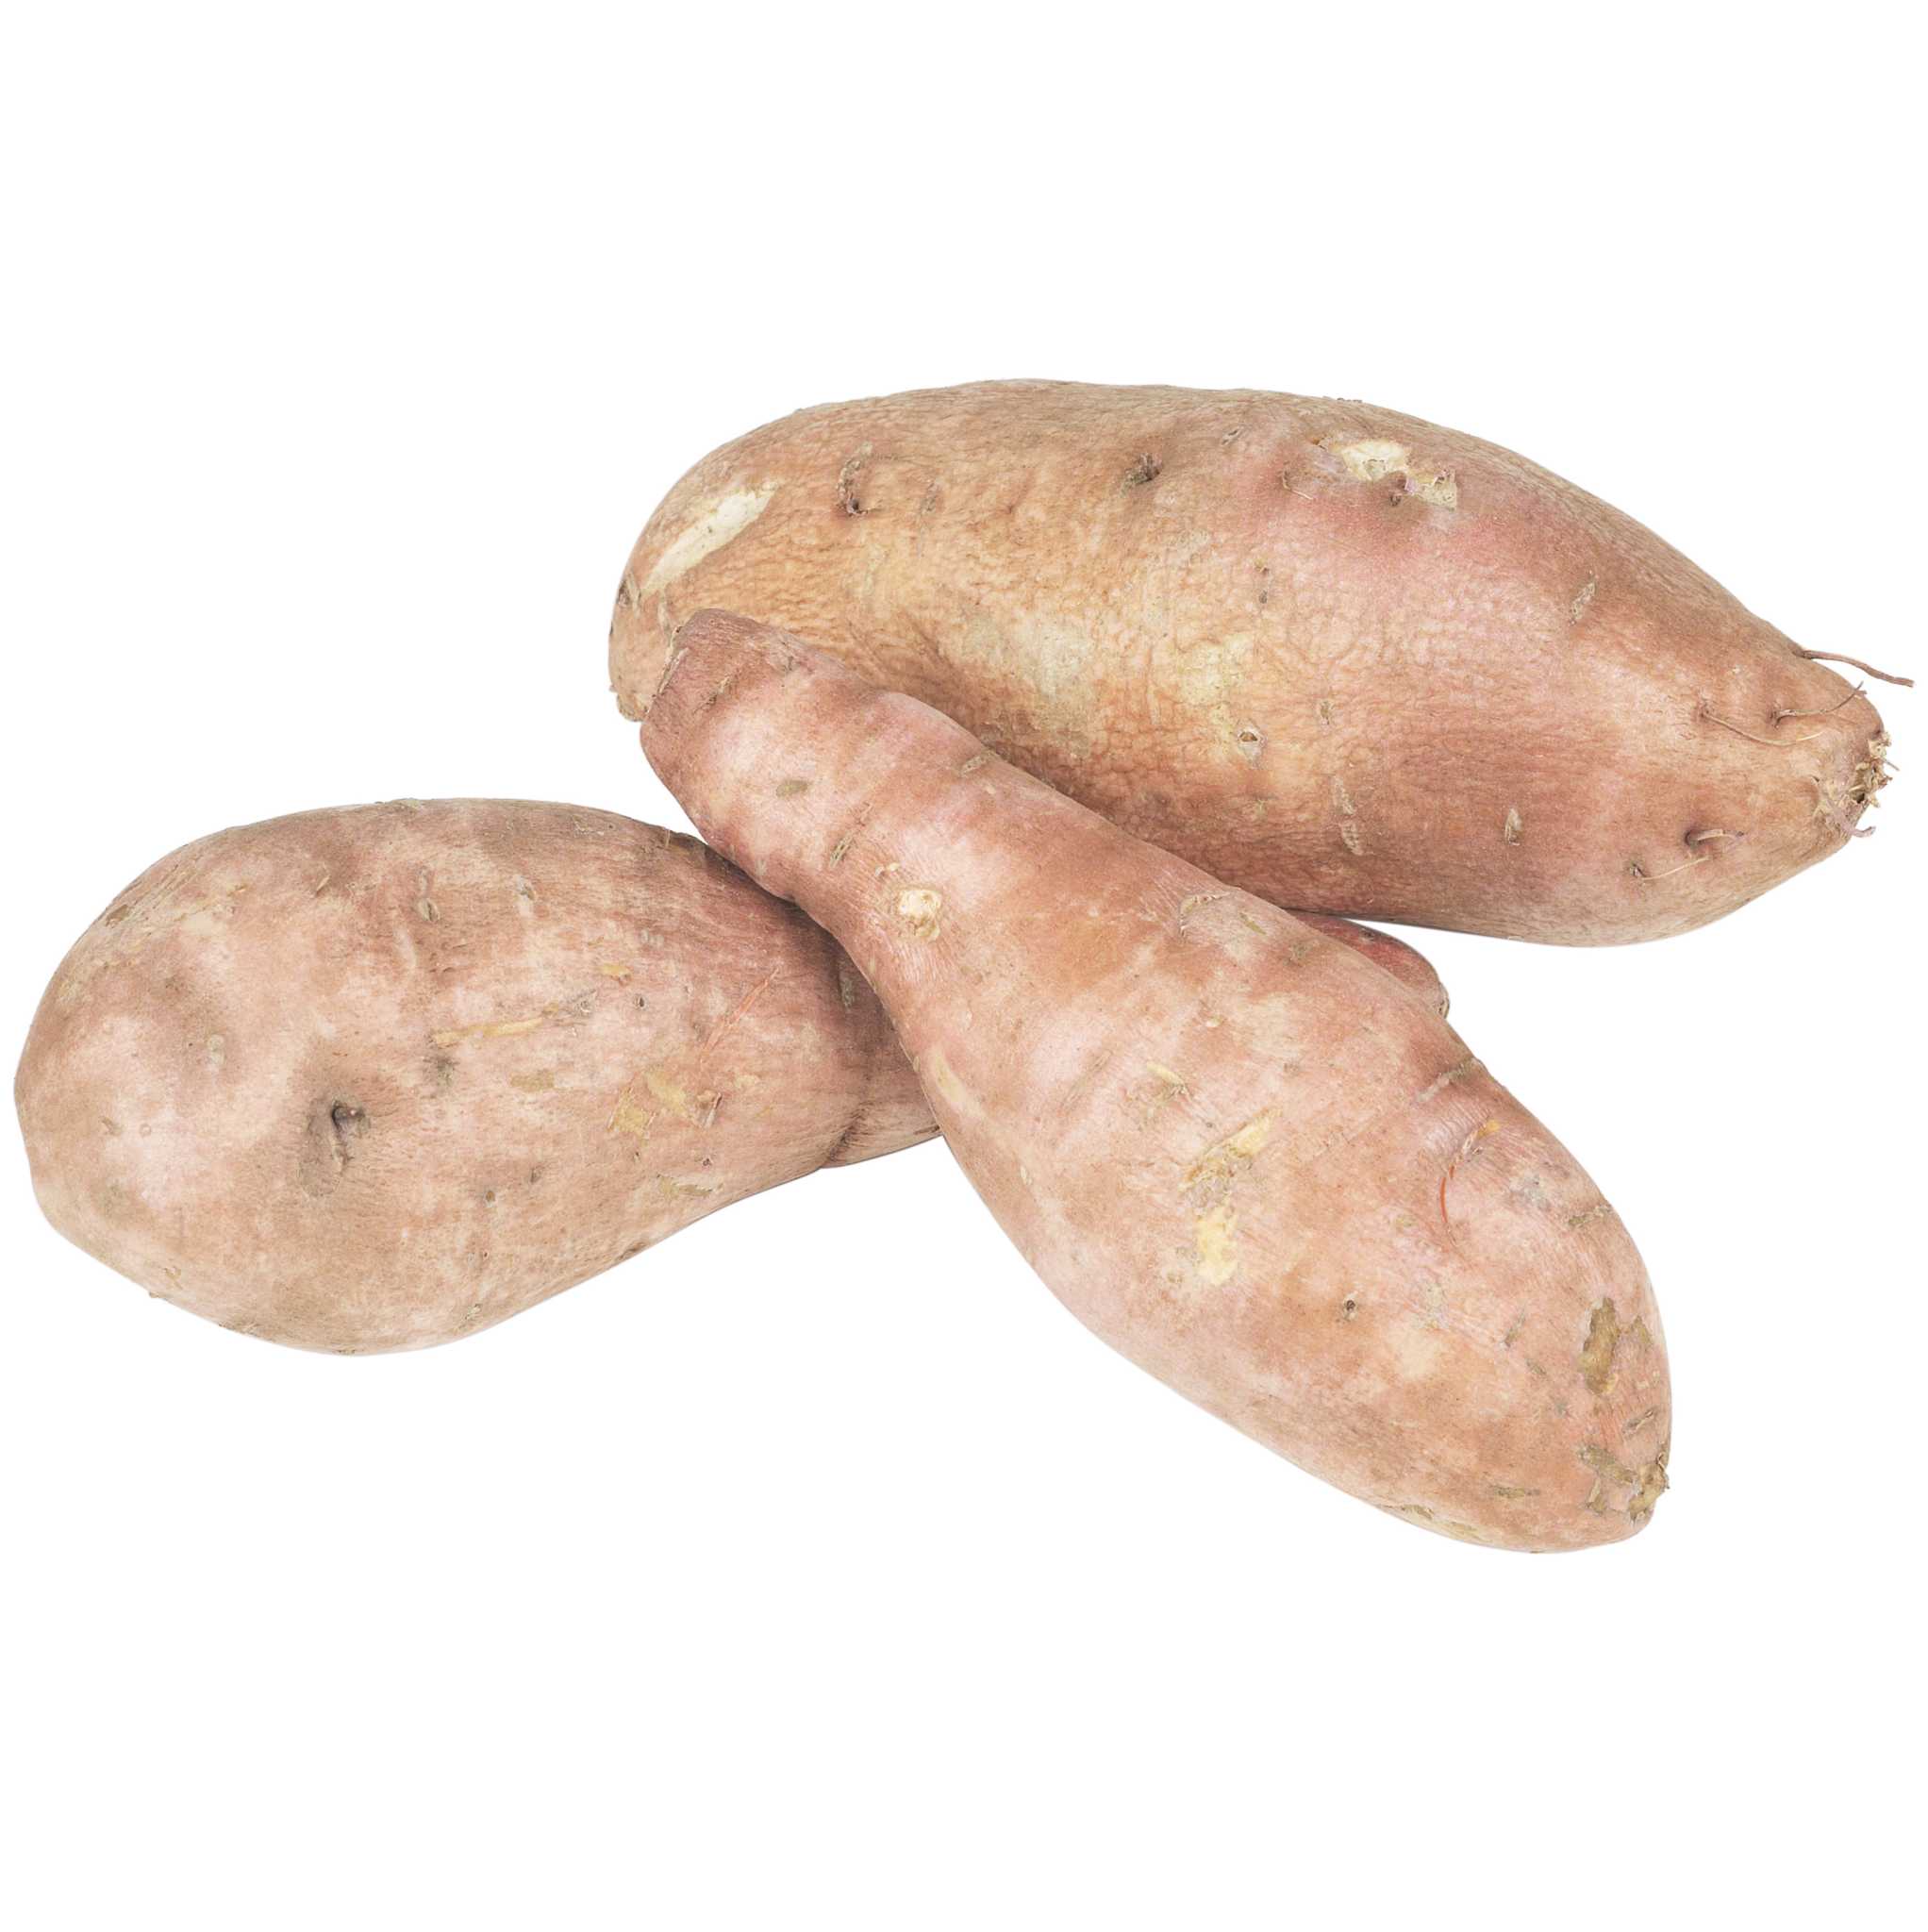 Yam Or Sweet Potato - How Do You Know Which Is Which? - Farmers' Almanac -  Plan Your Day. Grow Your Life.